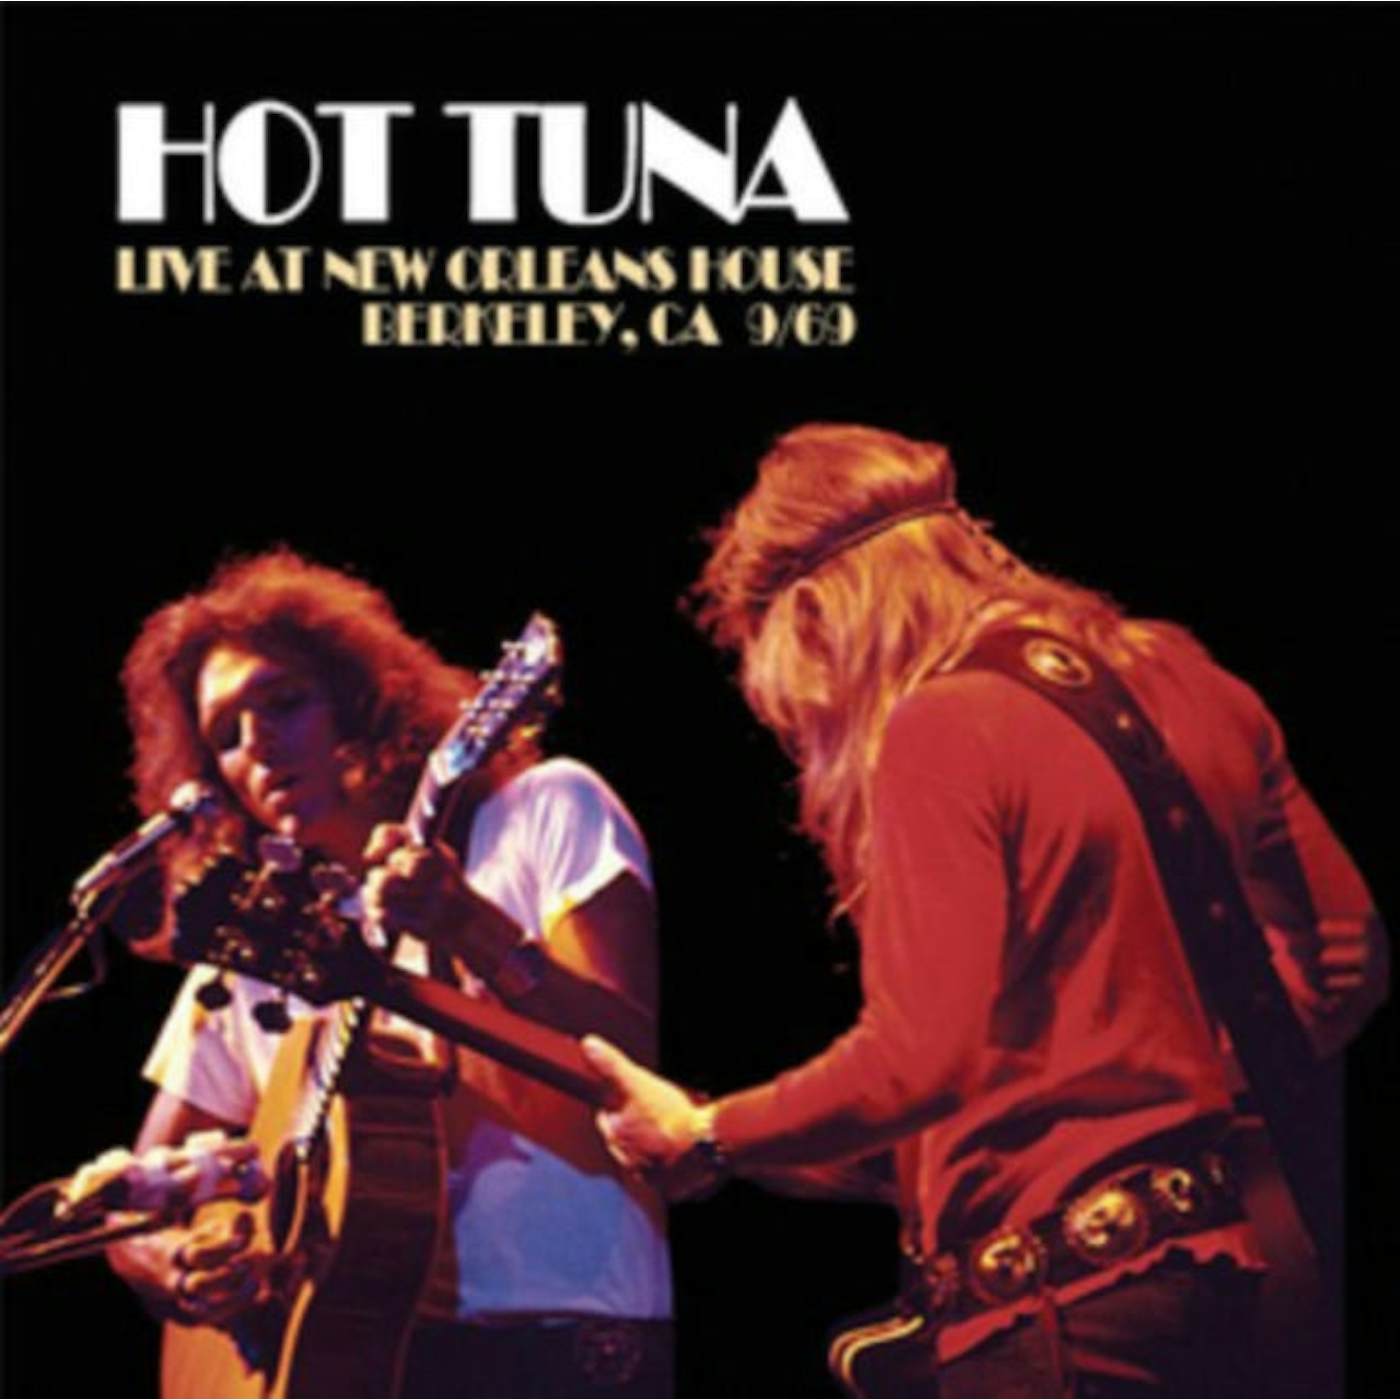 Hot Tuna CD - Live At New Orleans House. Berkeley Ca 9/69